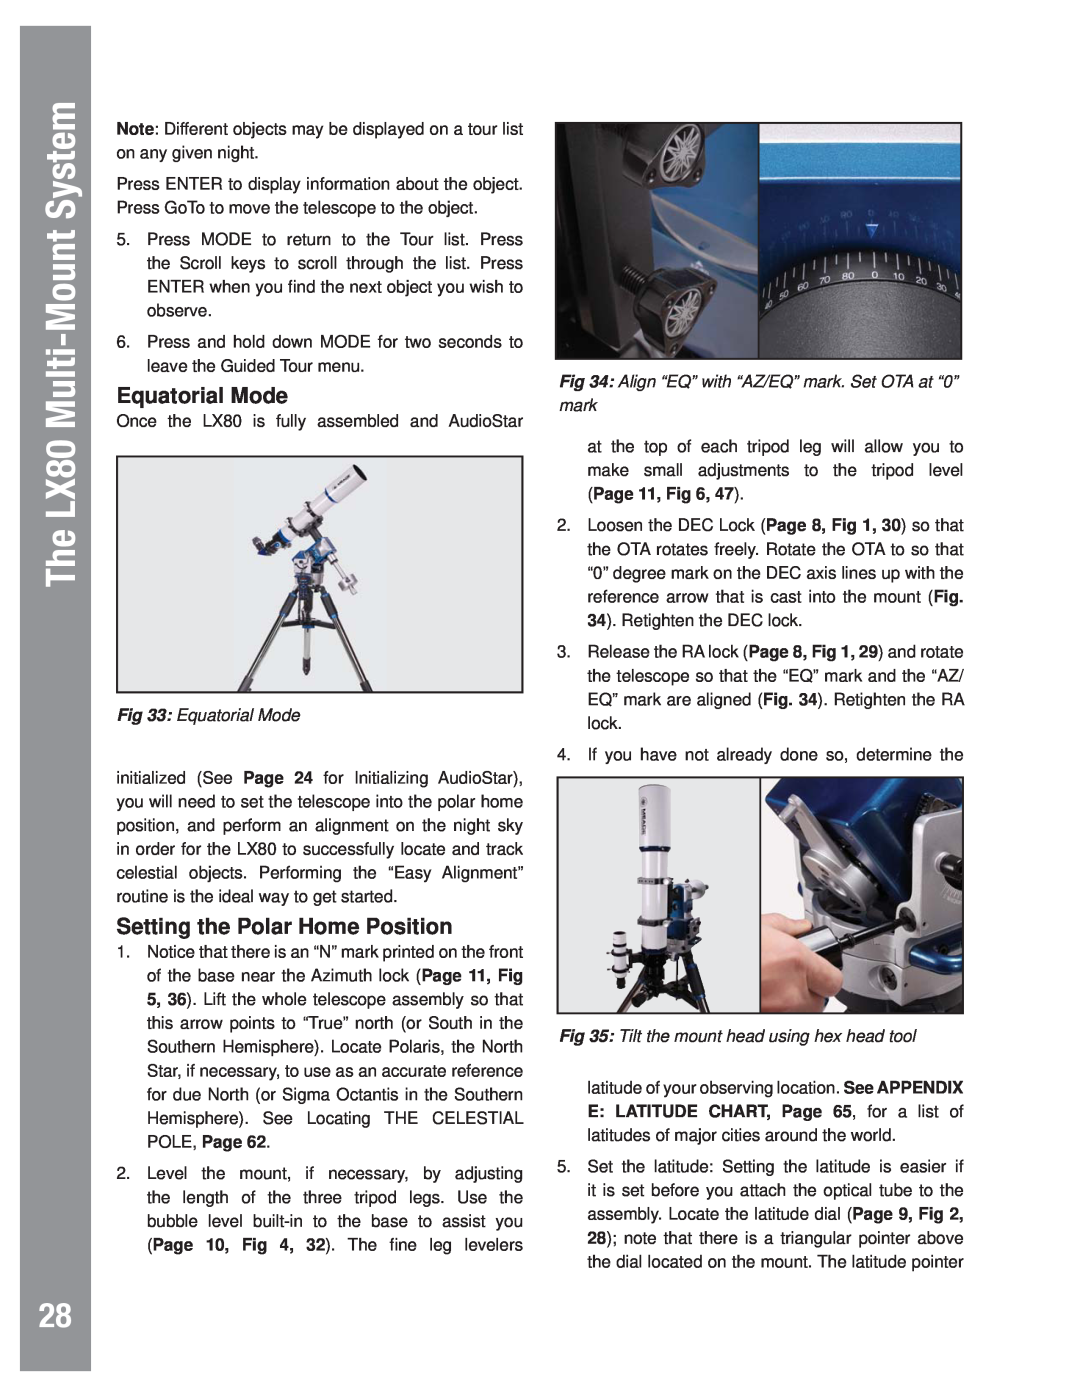 Meade instruction manual Equatorial Mode, Setting the Polar Home Position, The LX80 Multi-Mount System 